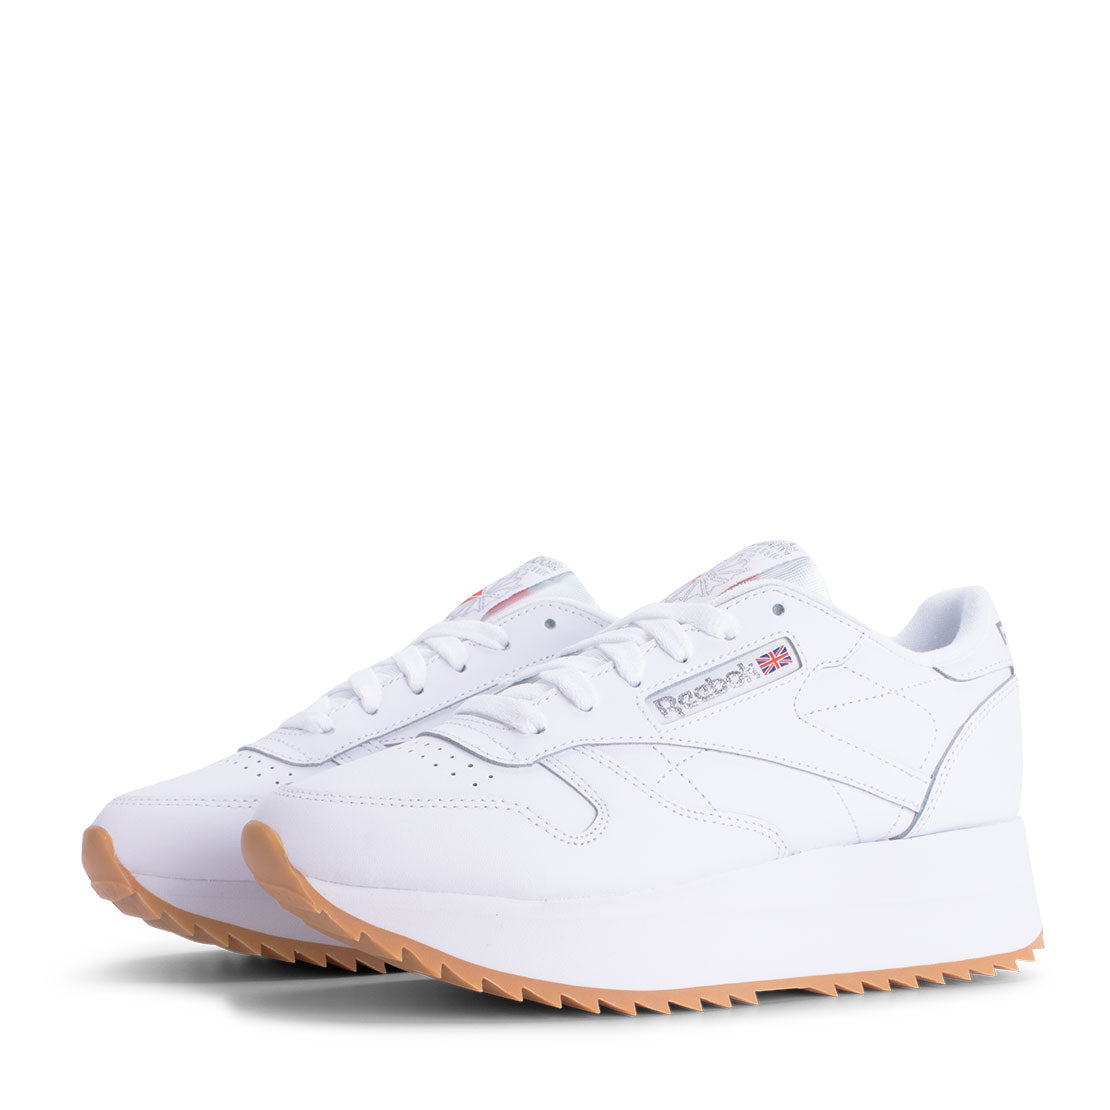 Reebok Classic Leather Double BR - DV6472-90